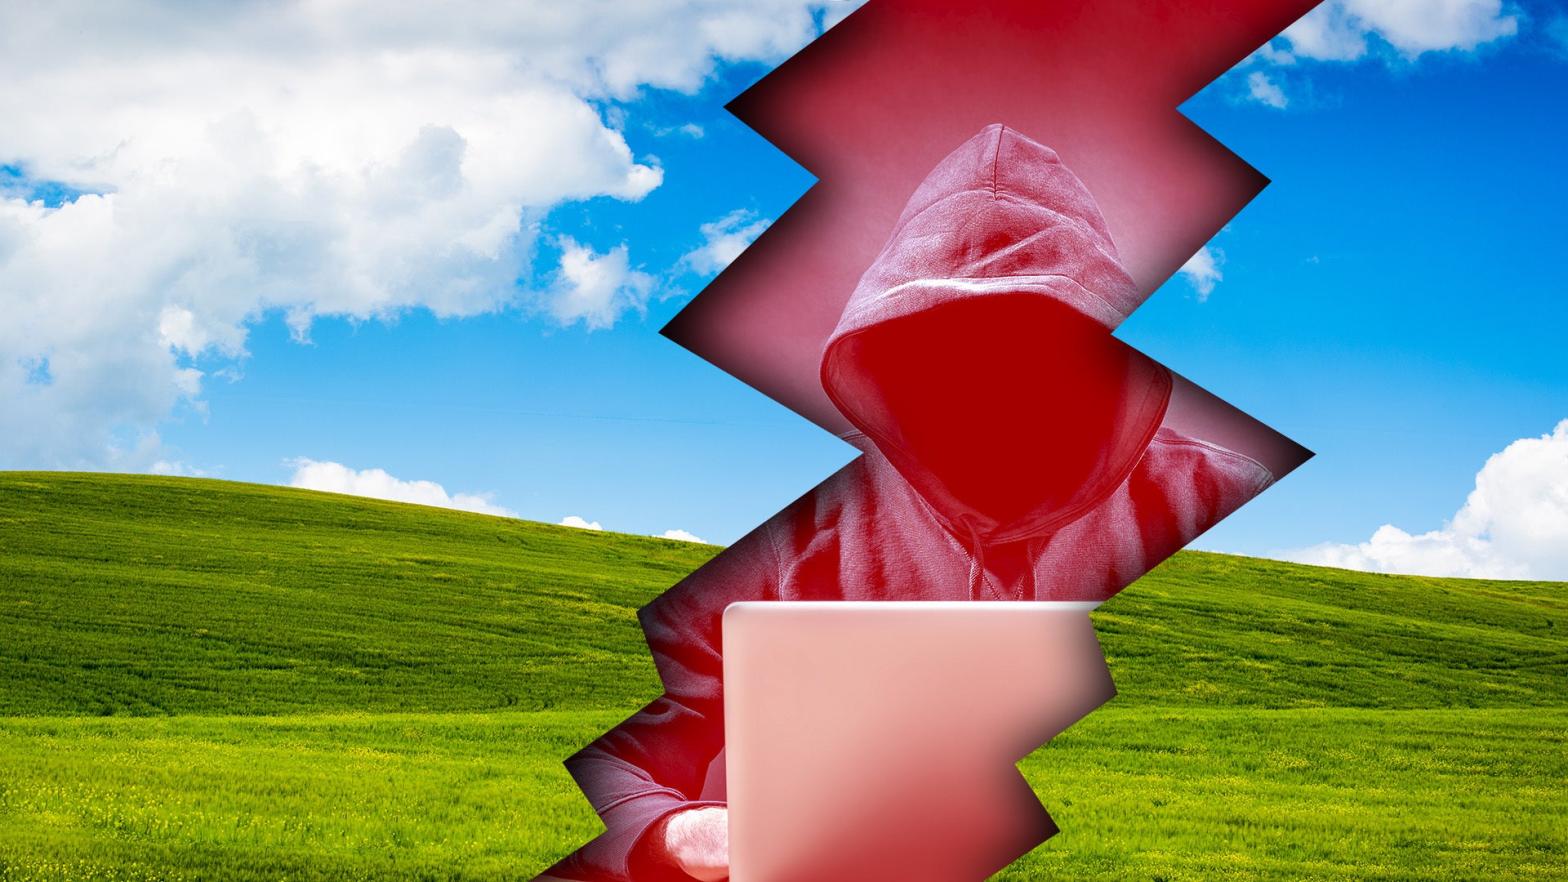 Those rolling green hills of the old Windows XP desktop background could be available once again for those with the hardware and know-how. (Image: Gizmodo)